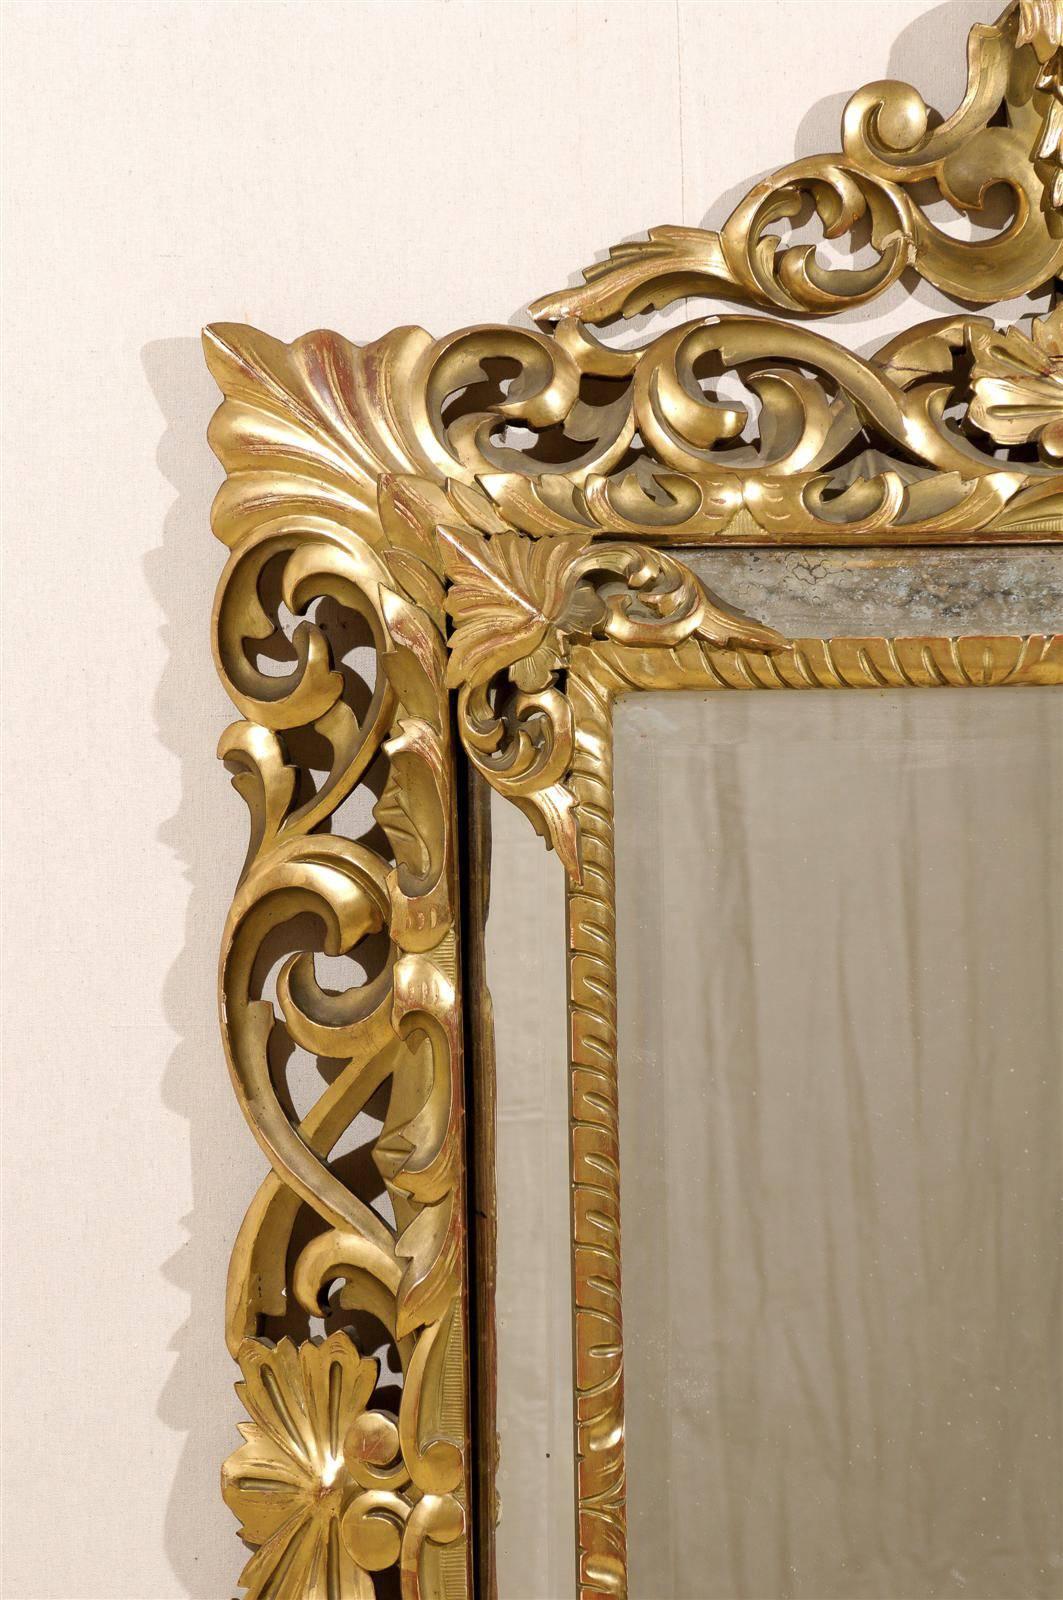 An Italian 19th Century Gilt Wood Mirror with Ornate Foliage Decor, Gold Color In Good Condition For Sale In Atlanta, GA